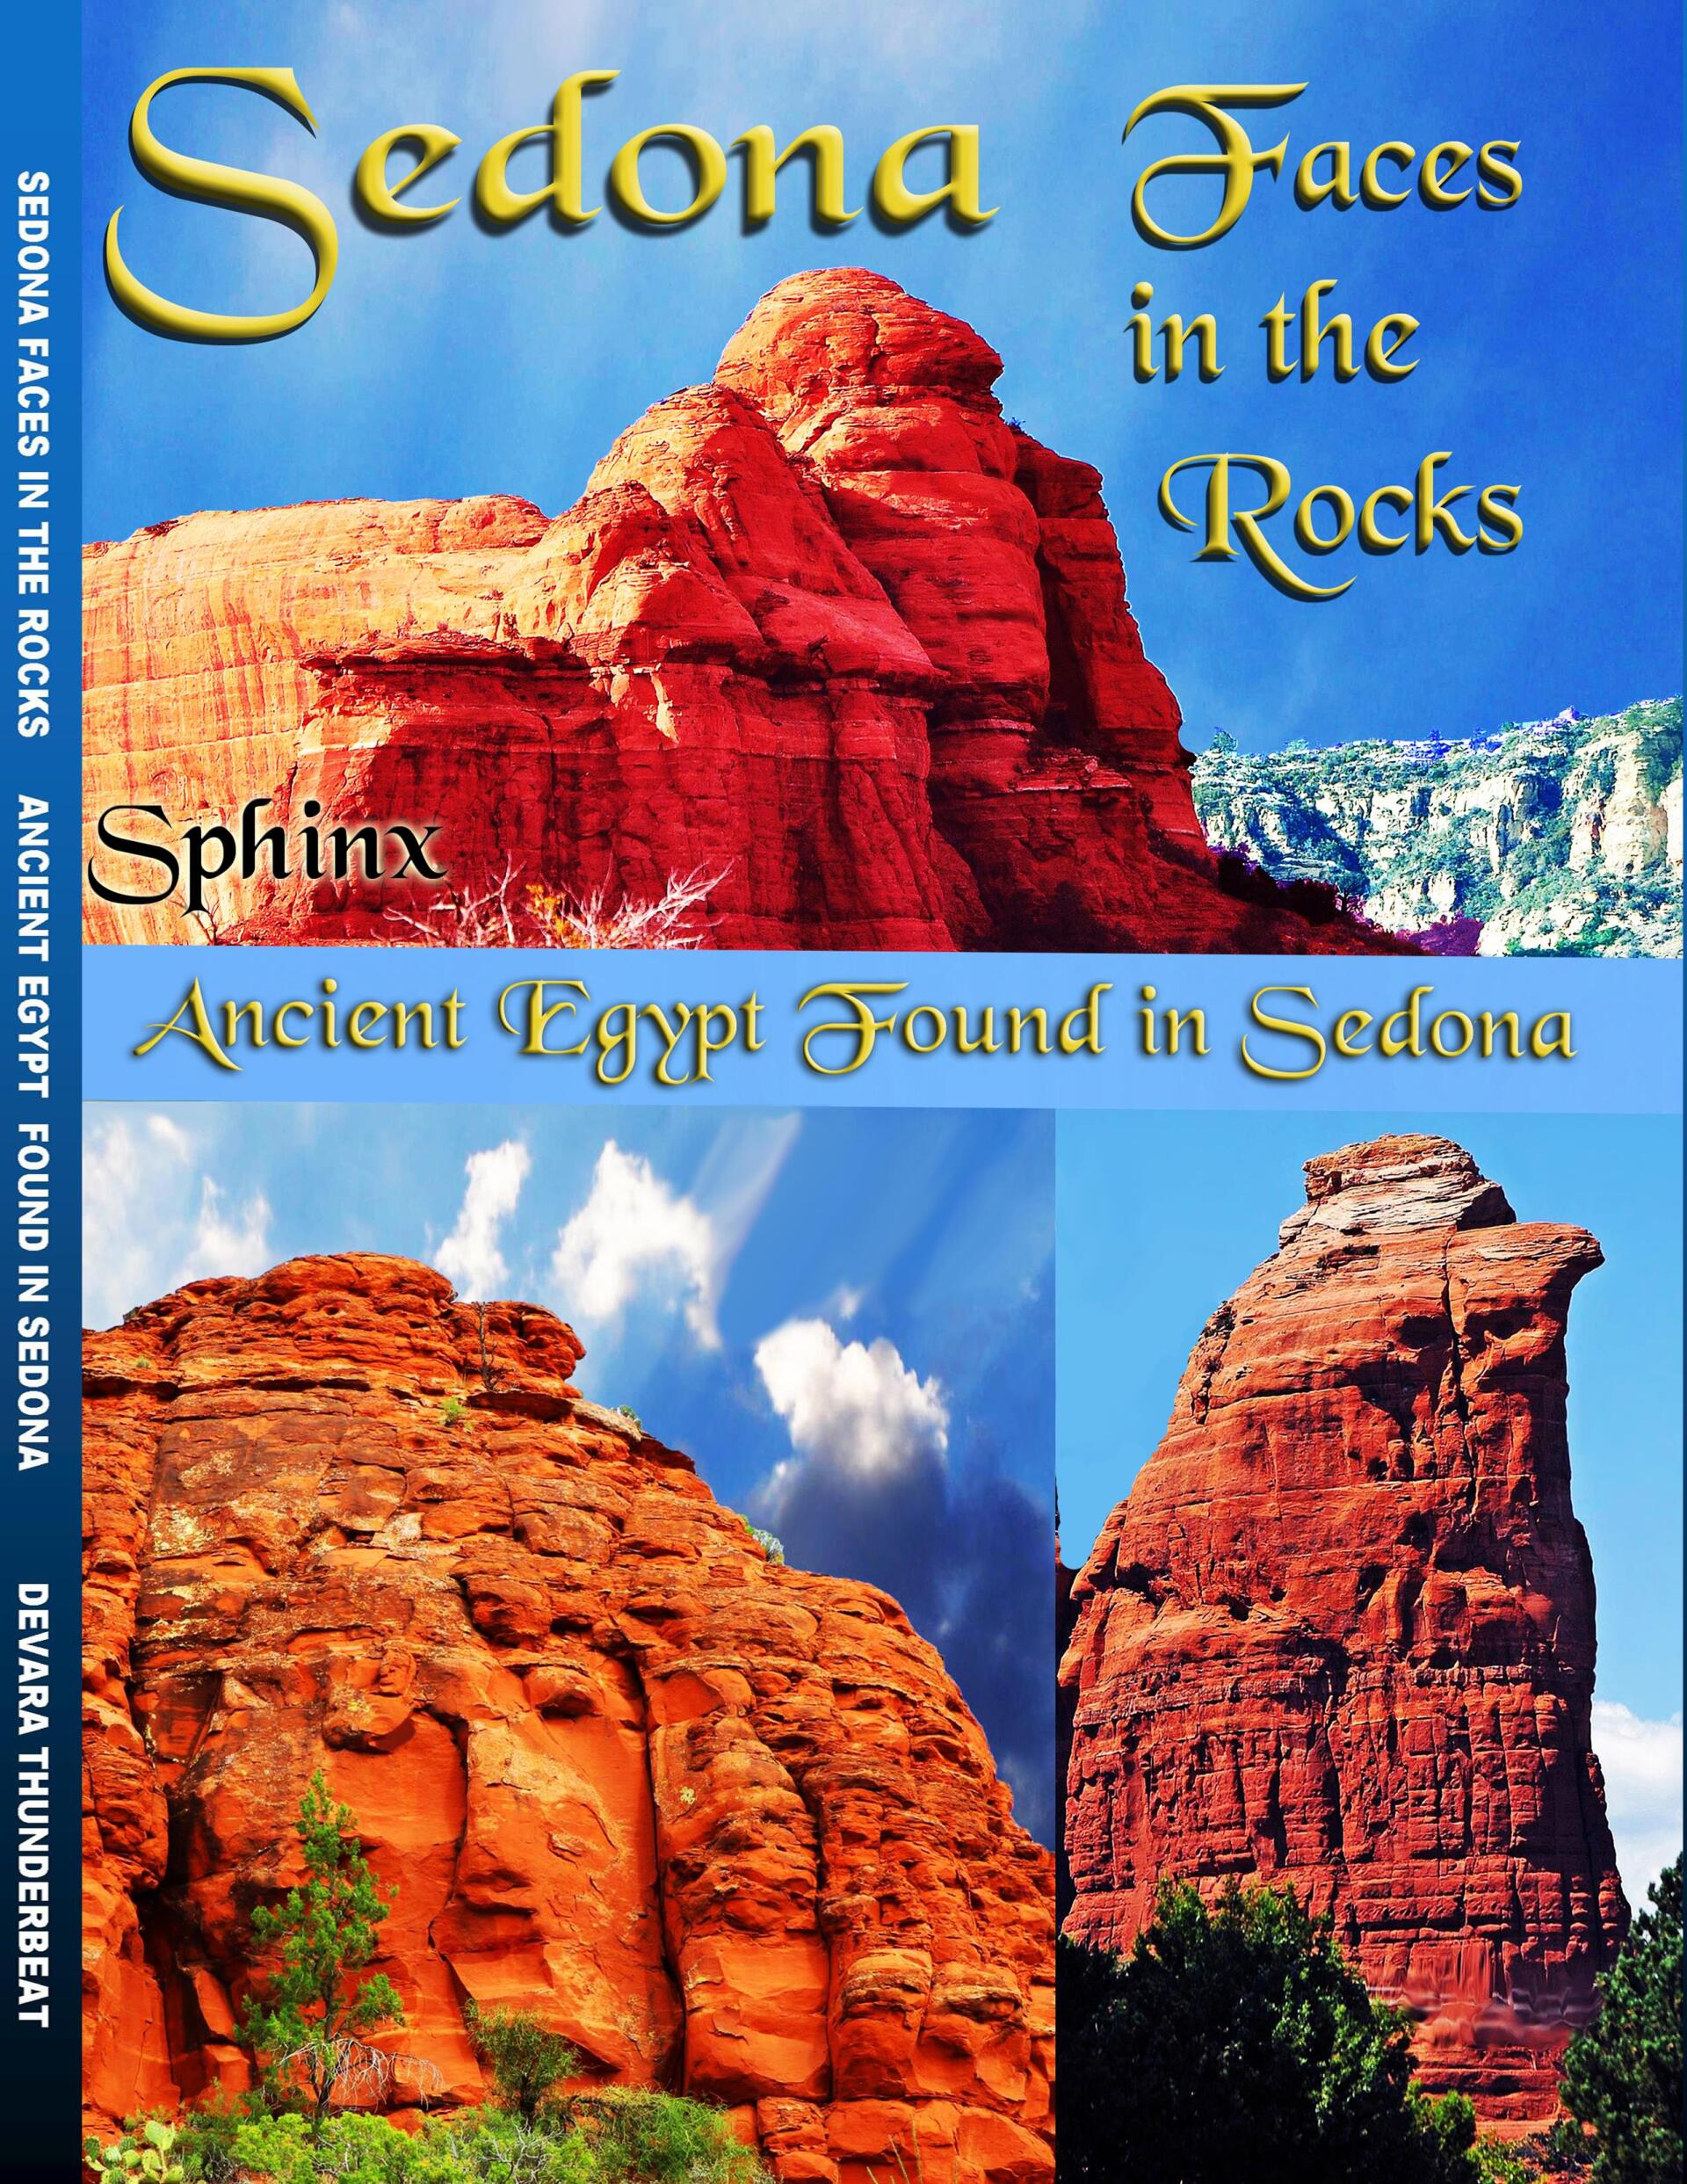 Sedona faces in the rocks image